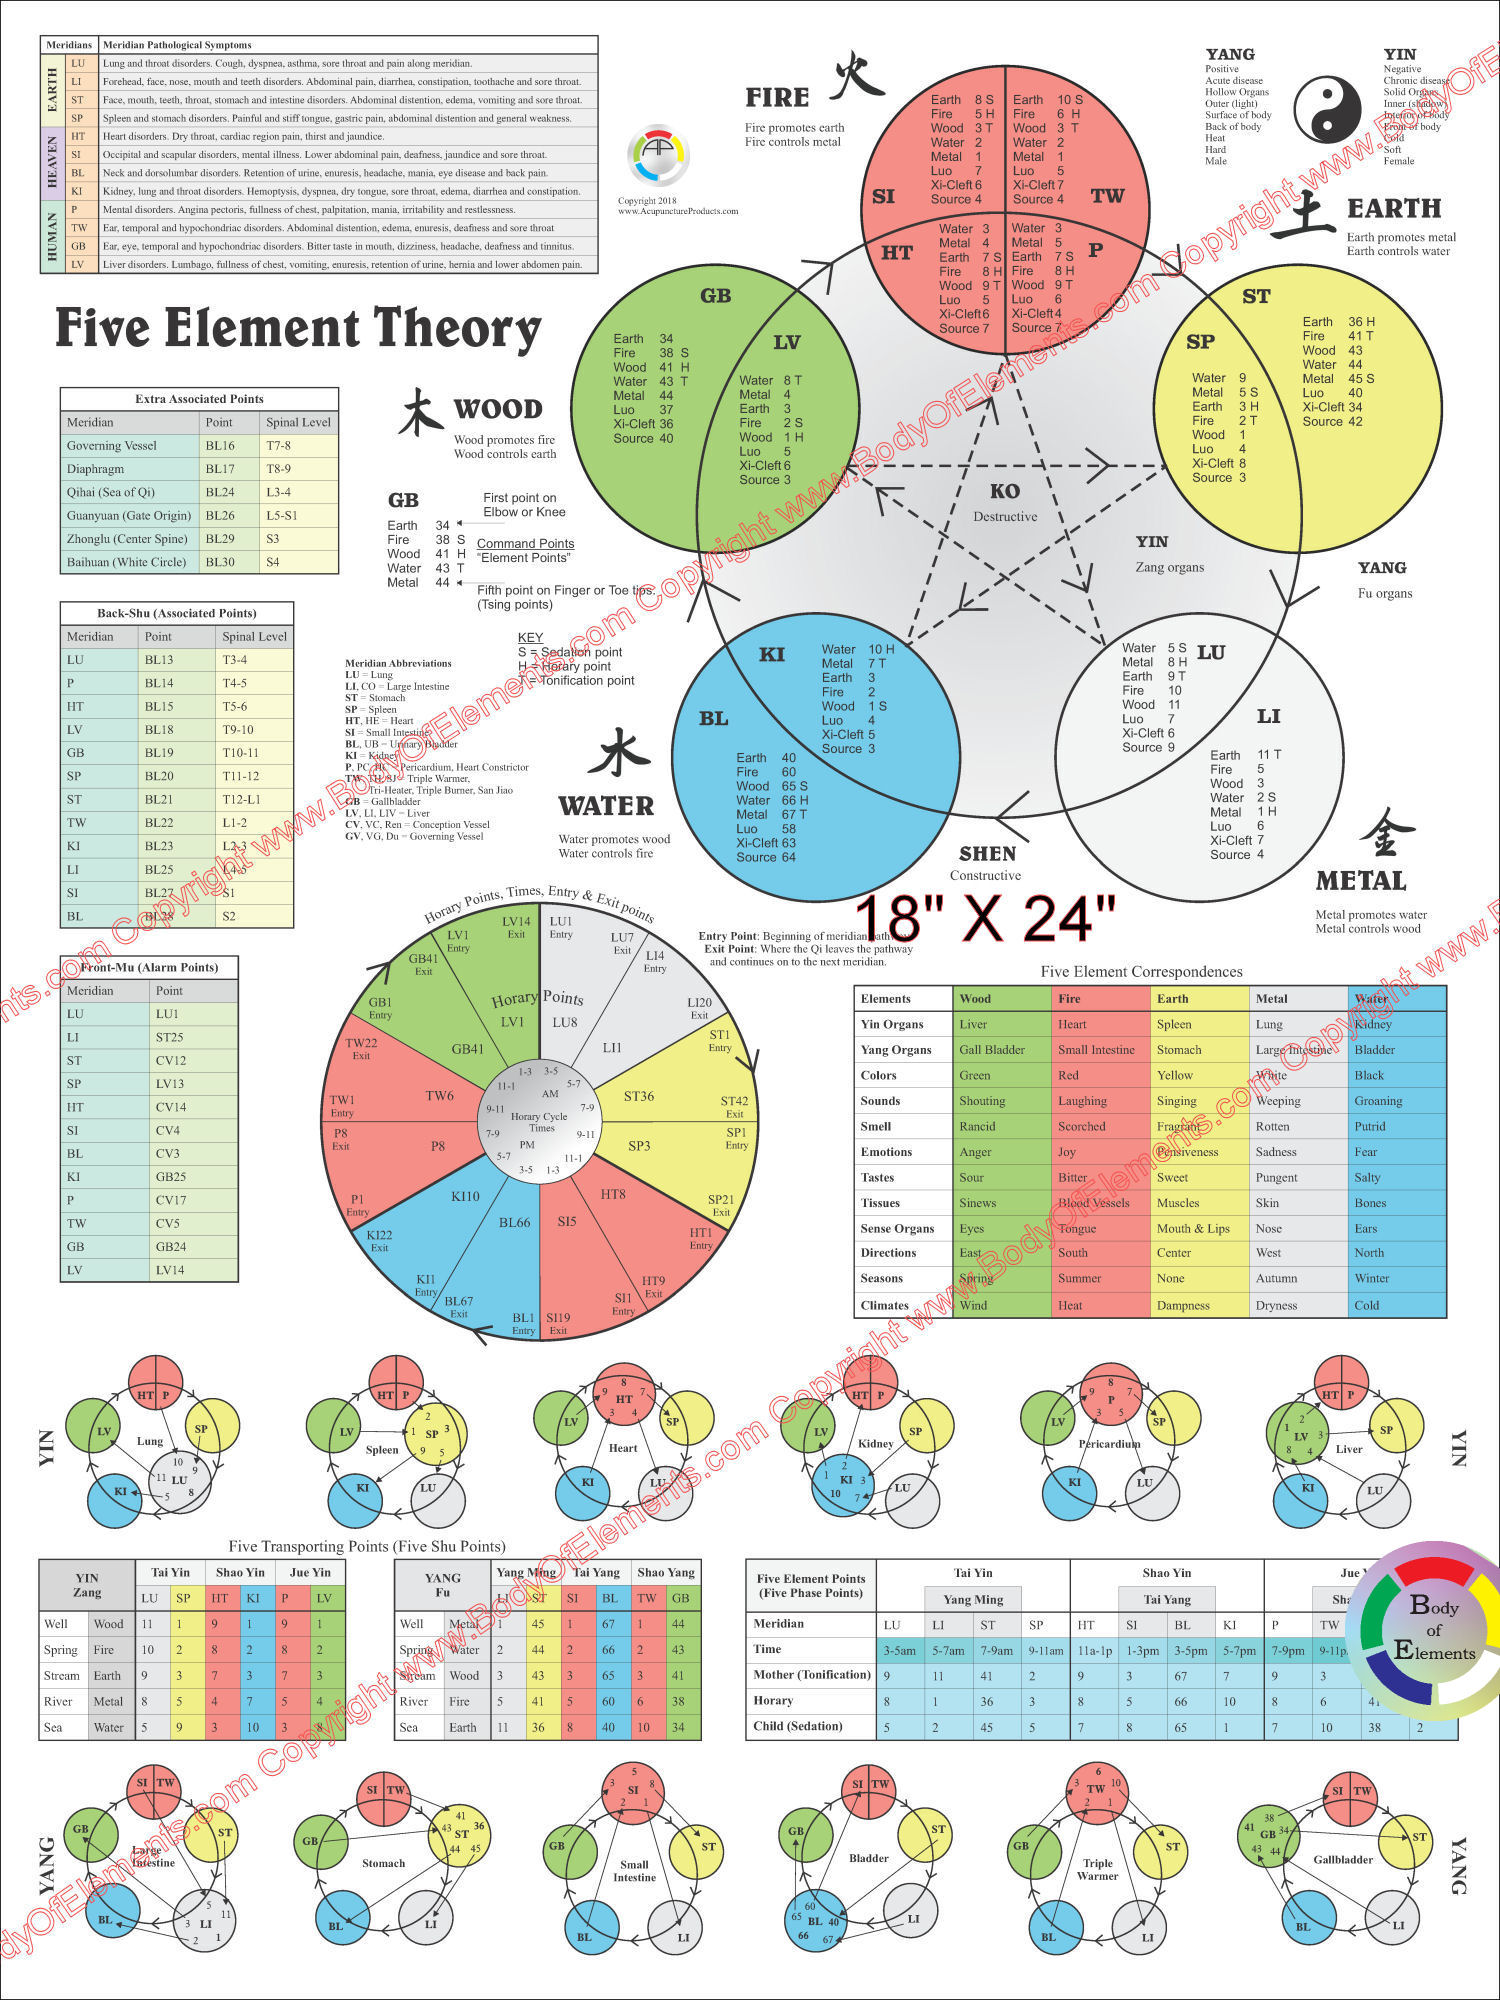 Five Element Theory of Acupuncture Poster